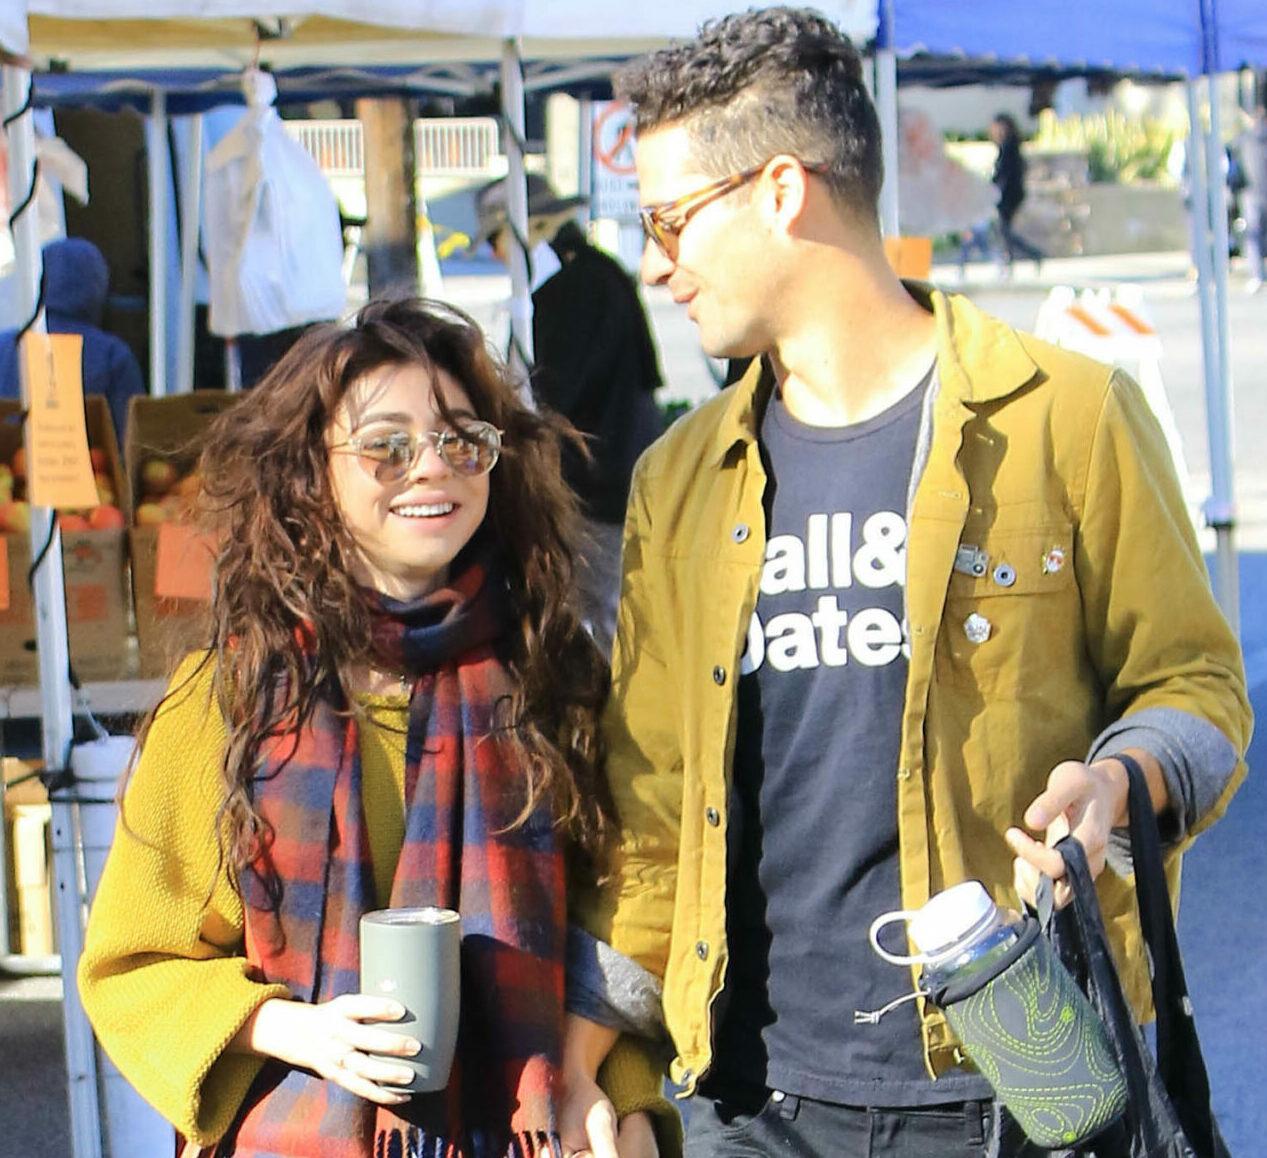 Wells Adams and Sarah Hyland are seen at the Farmer's Market in Los Angeles, CA.